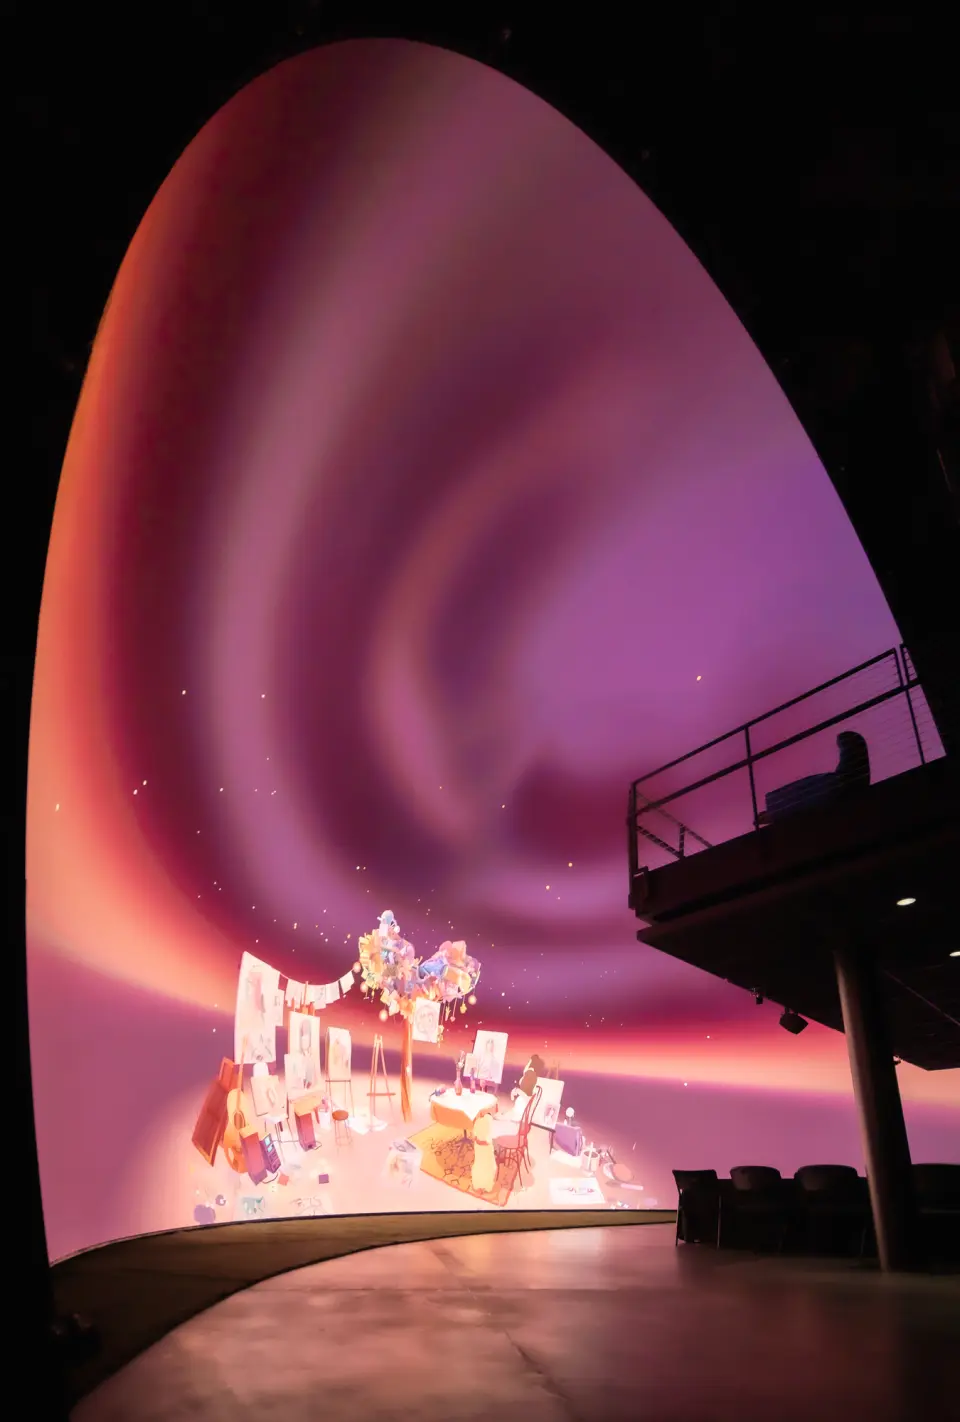 "NAMOO" on Cosm Experience Center dome